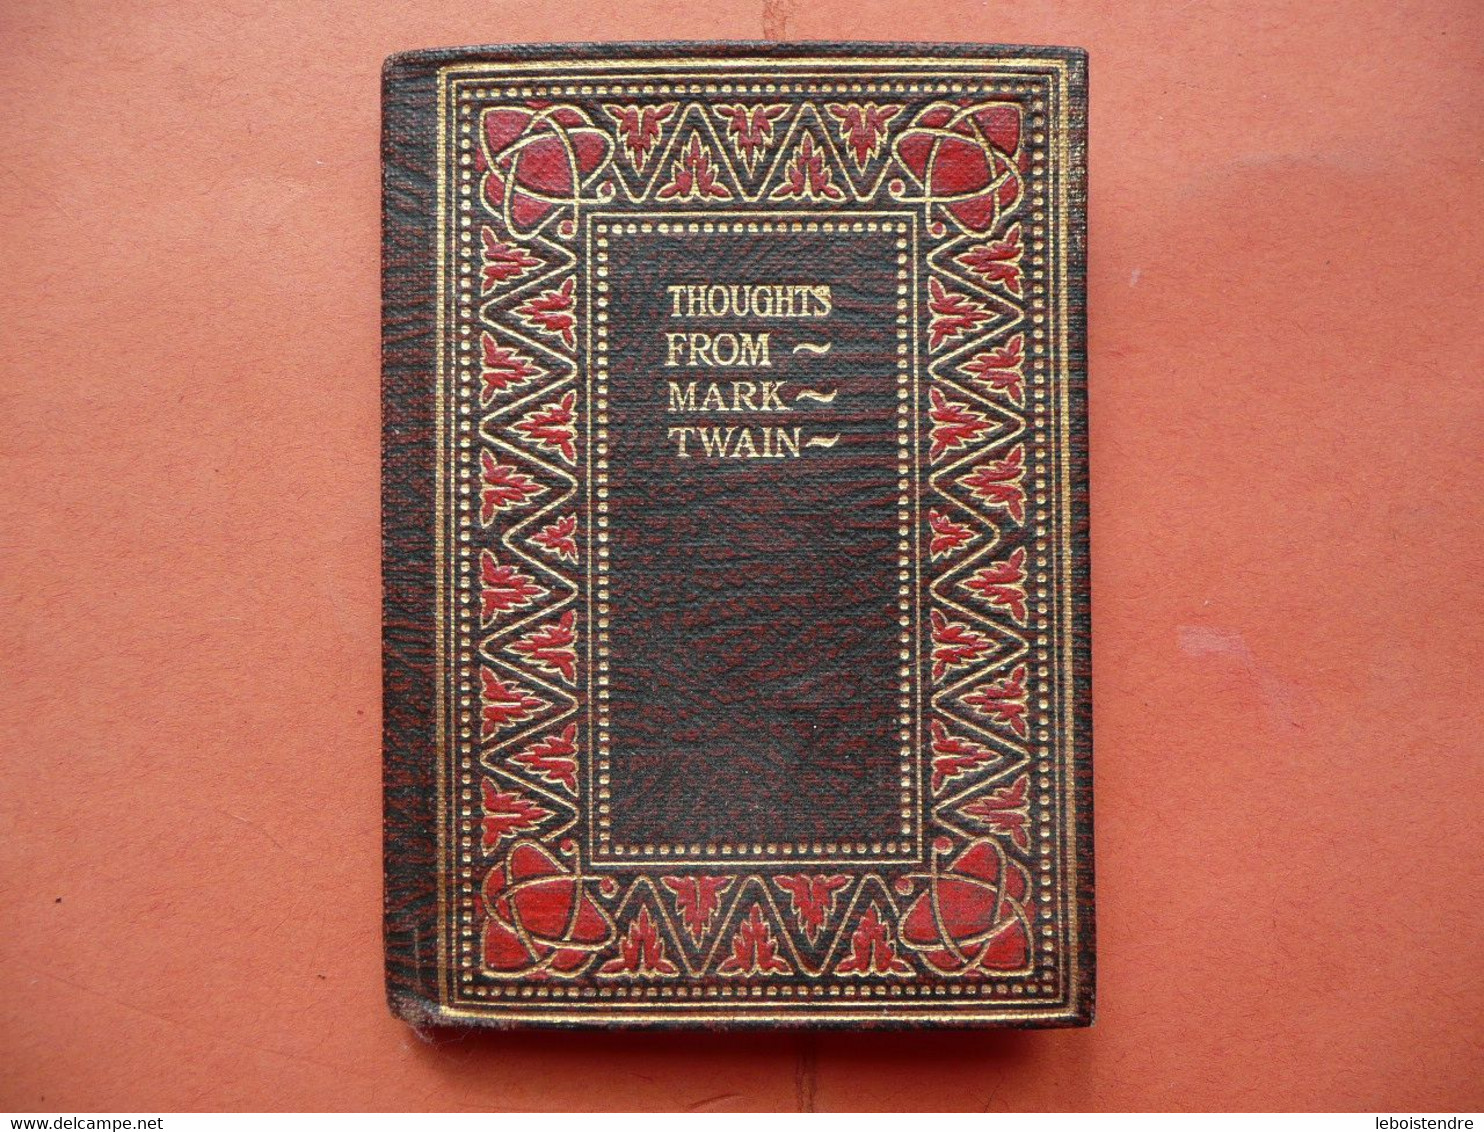 THOUGHTS FROM MARK TWAIN SELECTED BY ELSIE E. MORTON SESAME BOOKLETS MINIATURE - Littéraire